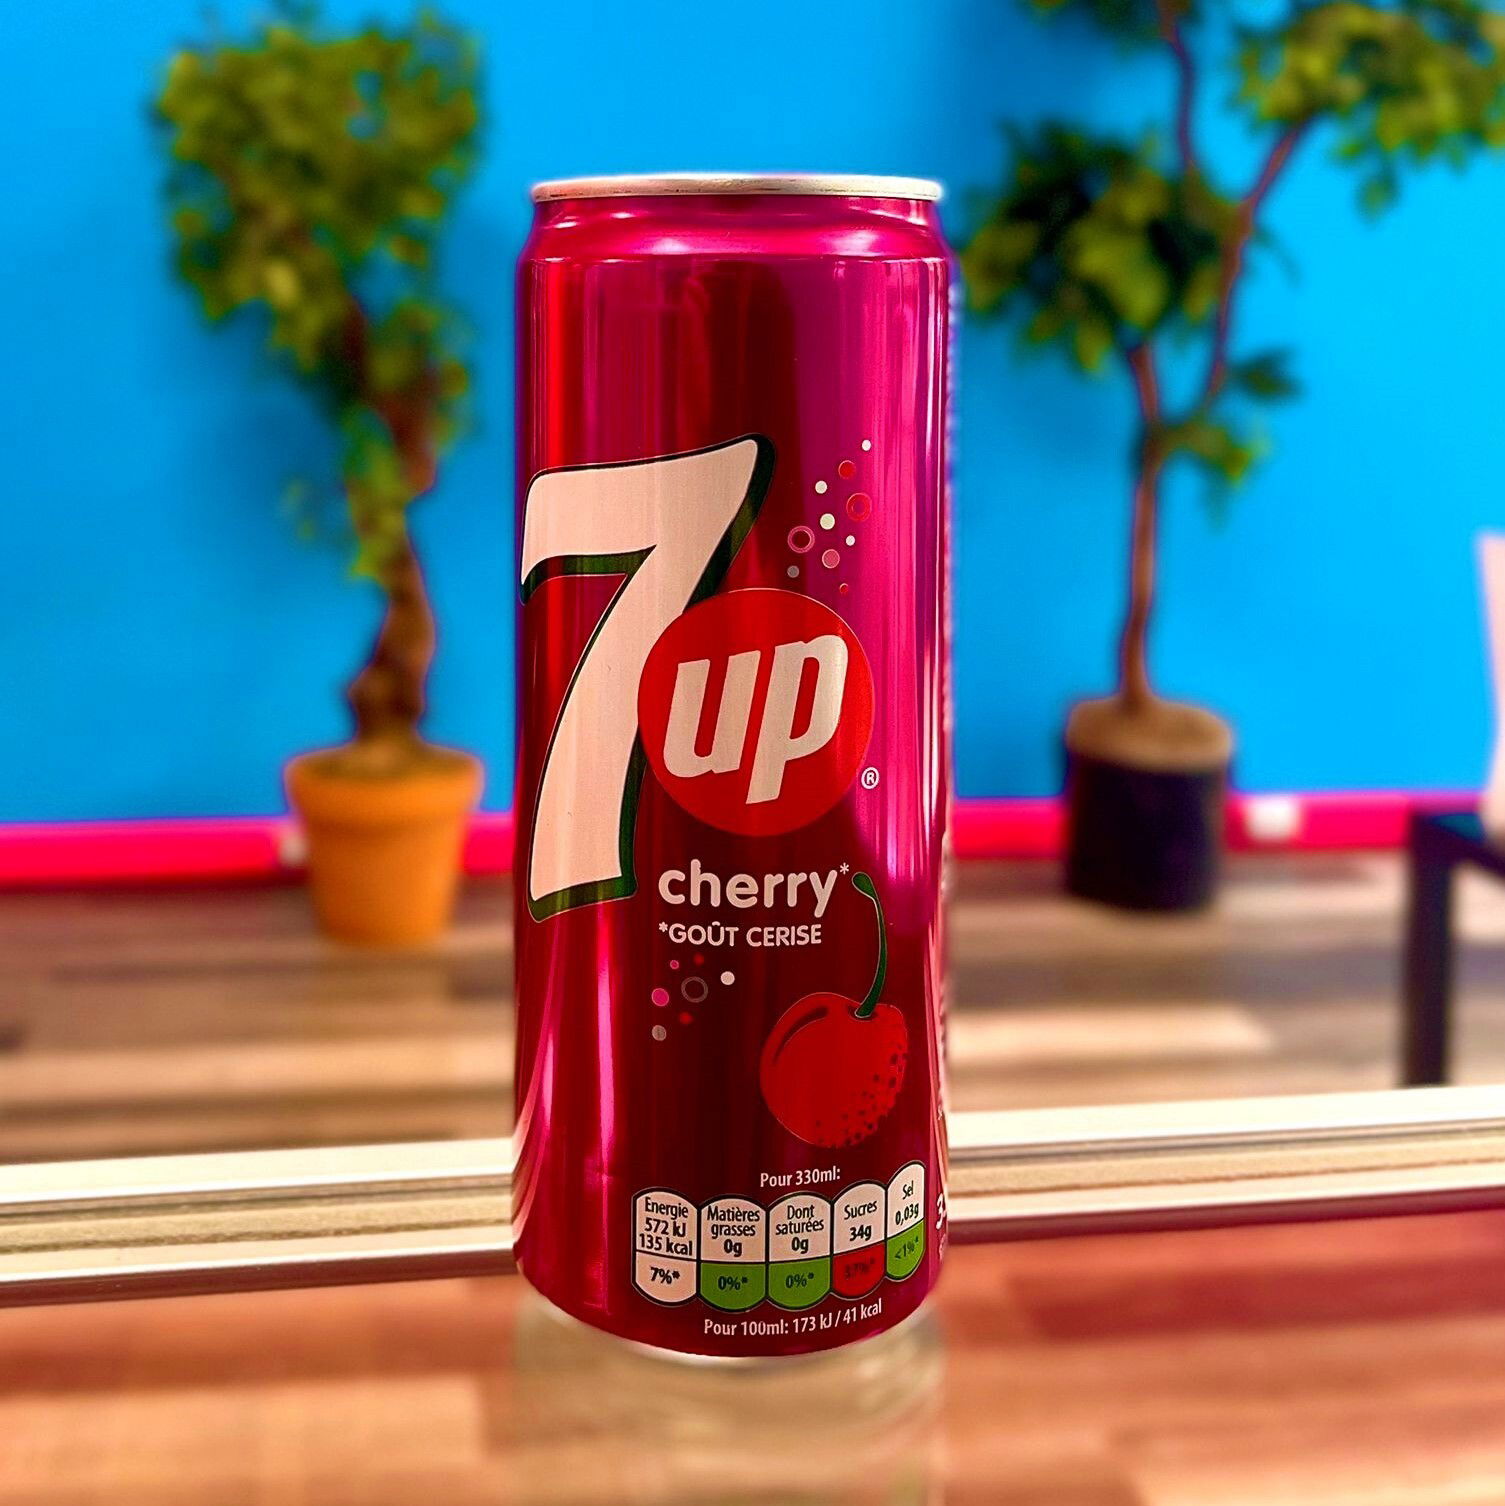 7up Cherry France